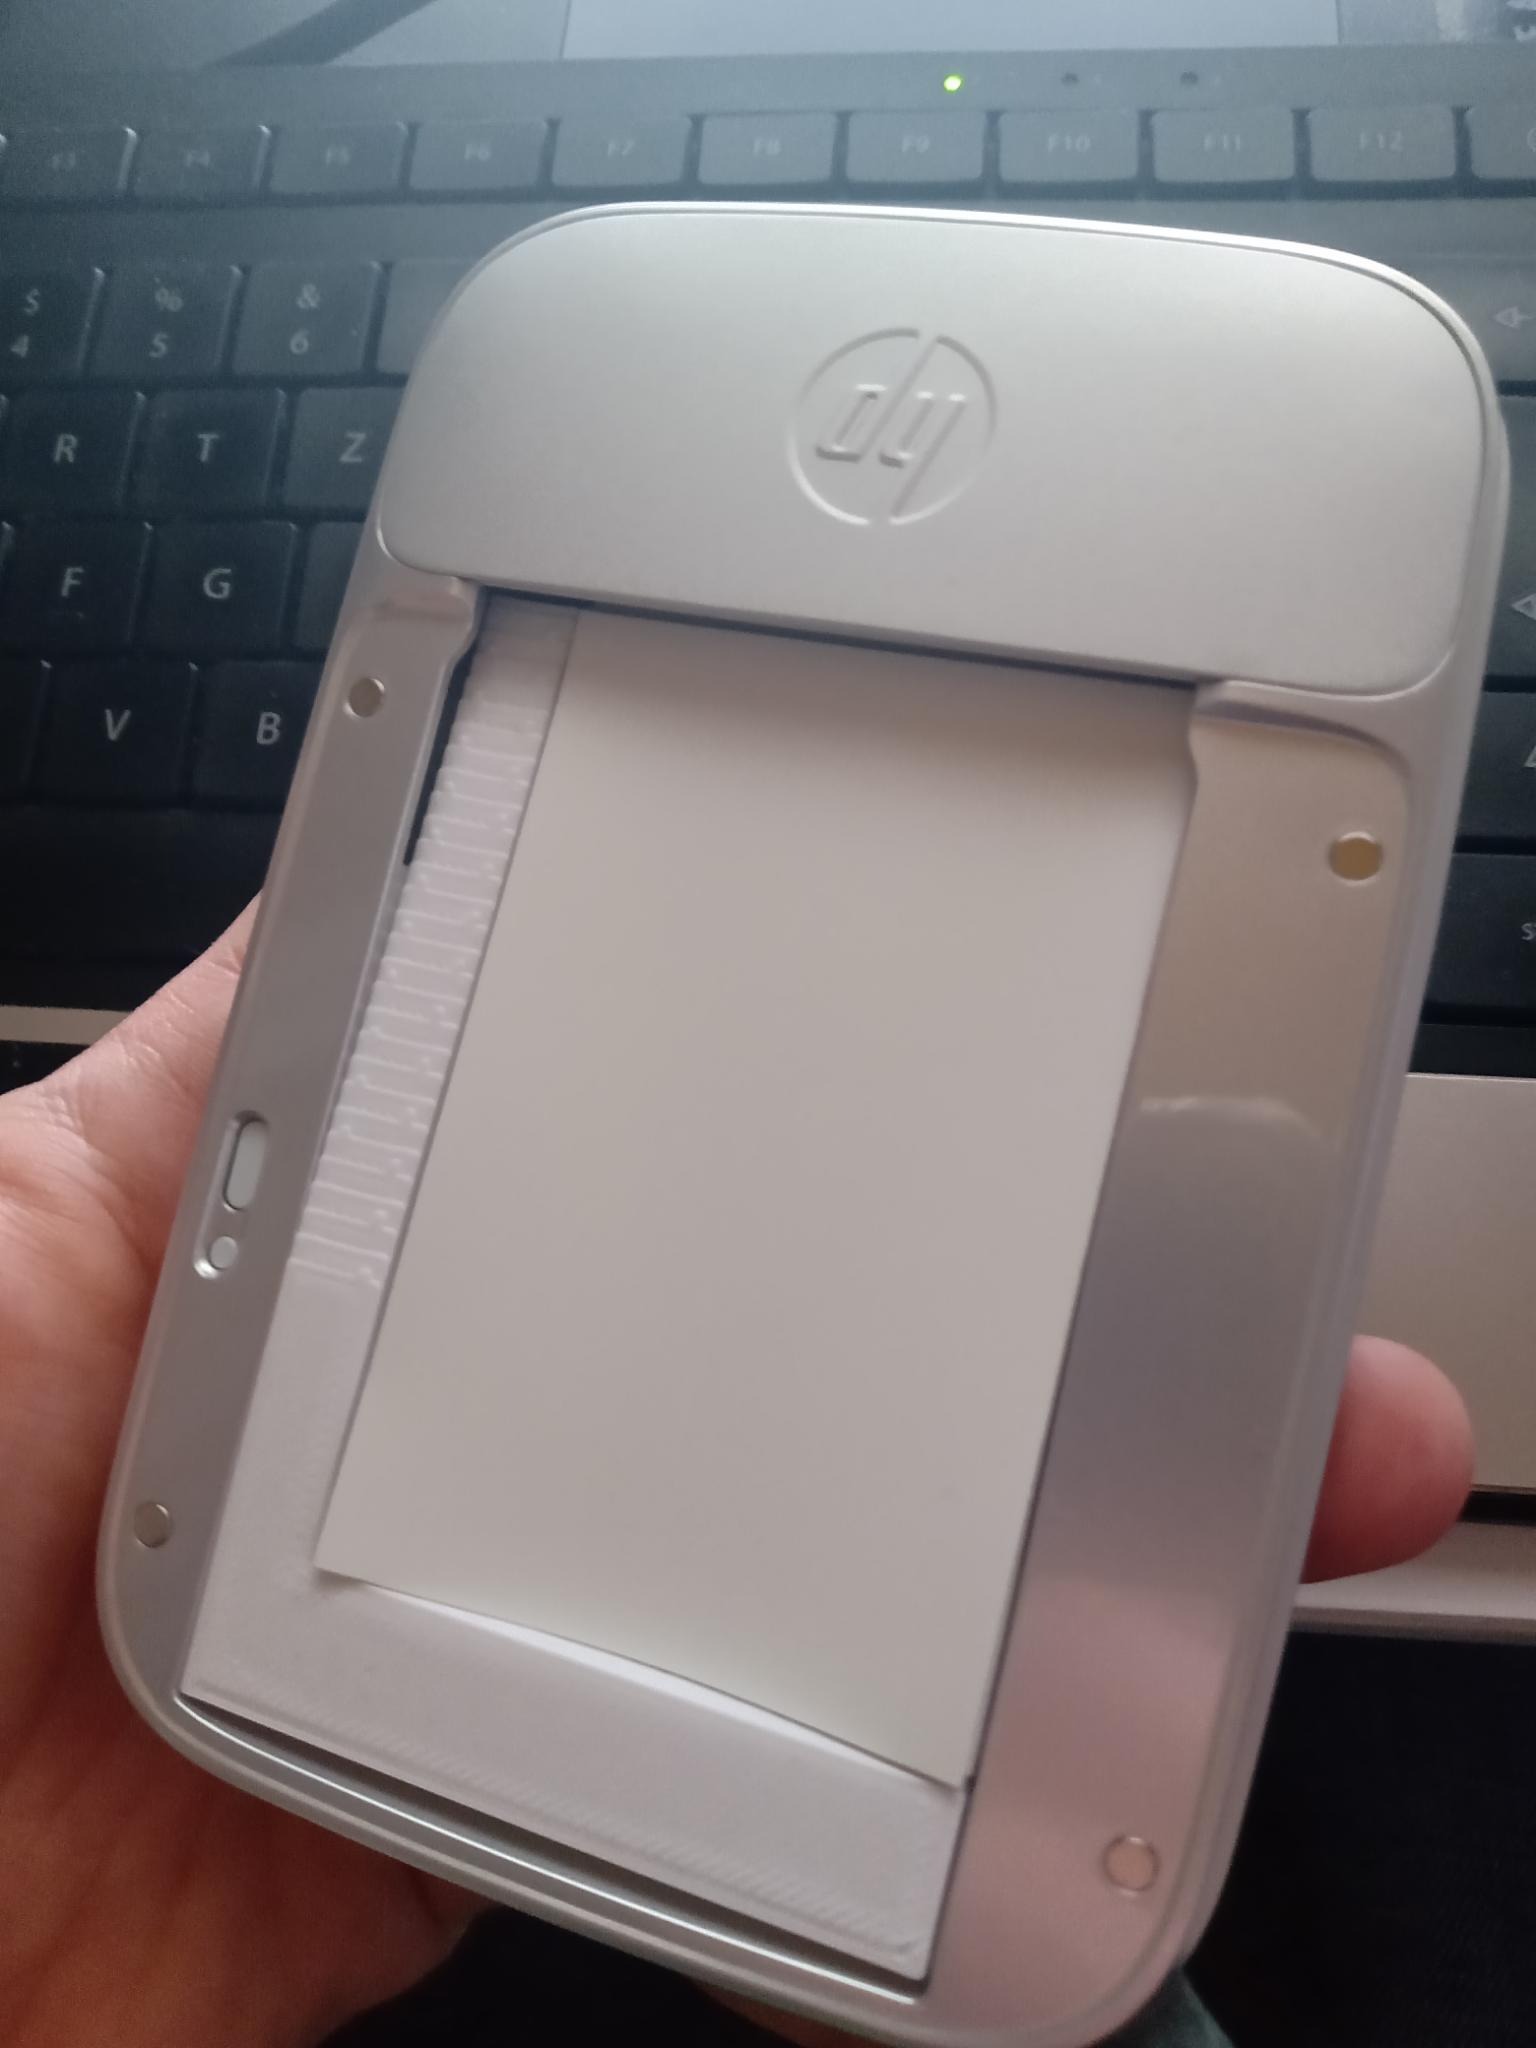 HP Sprocket paper size adapter